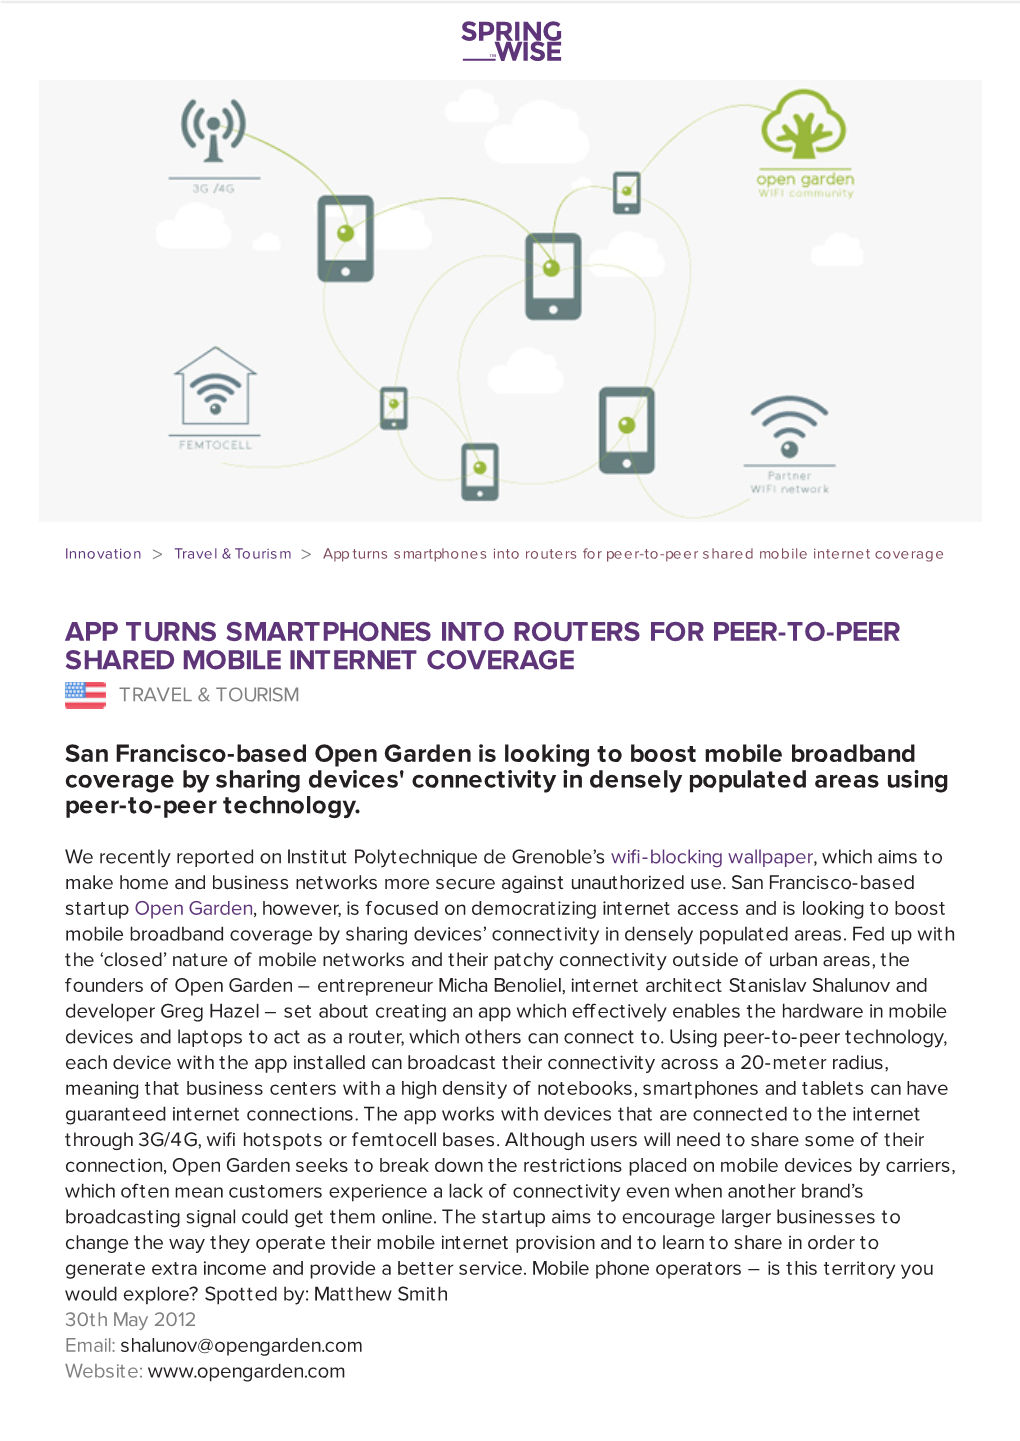 App Turns Smartphones Into Routers for Peer-To-Peer Shared Mobile Internet Coverage